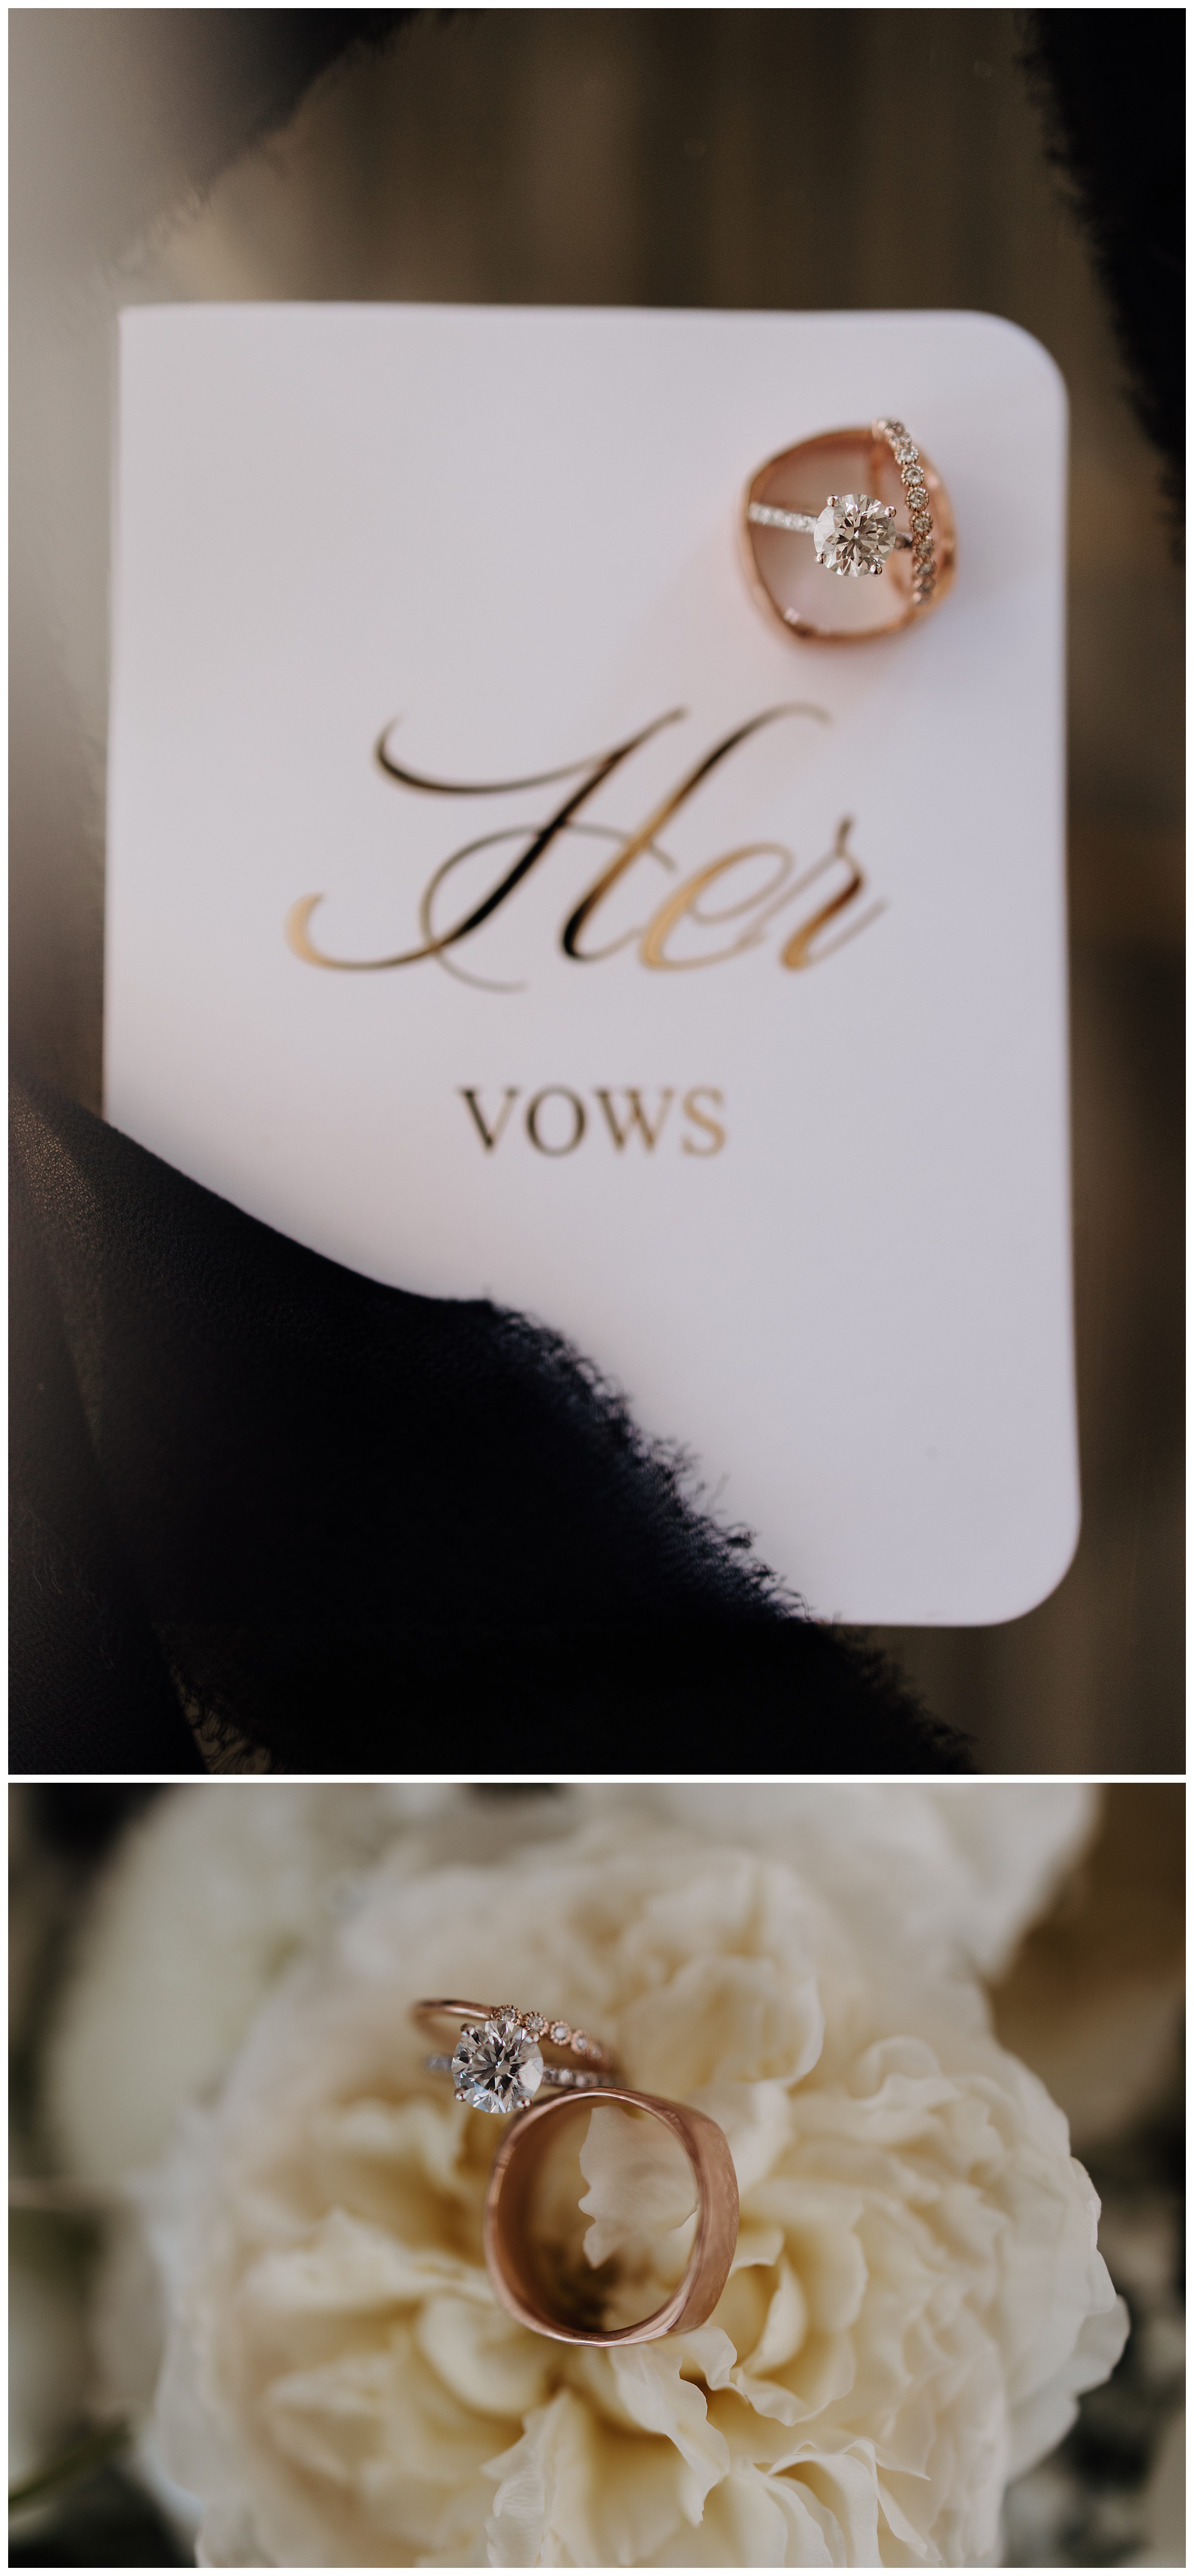 her vows book, rings on vow book, wedding details